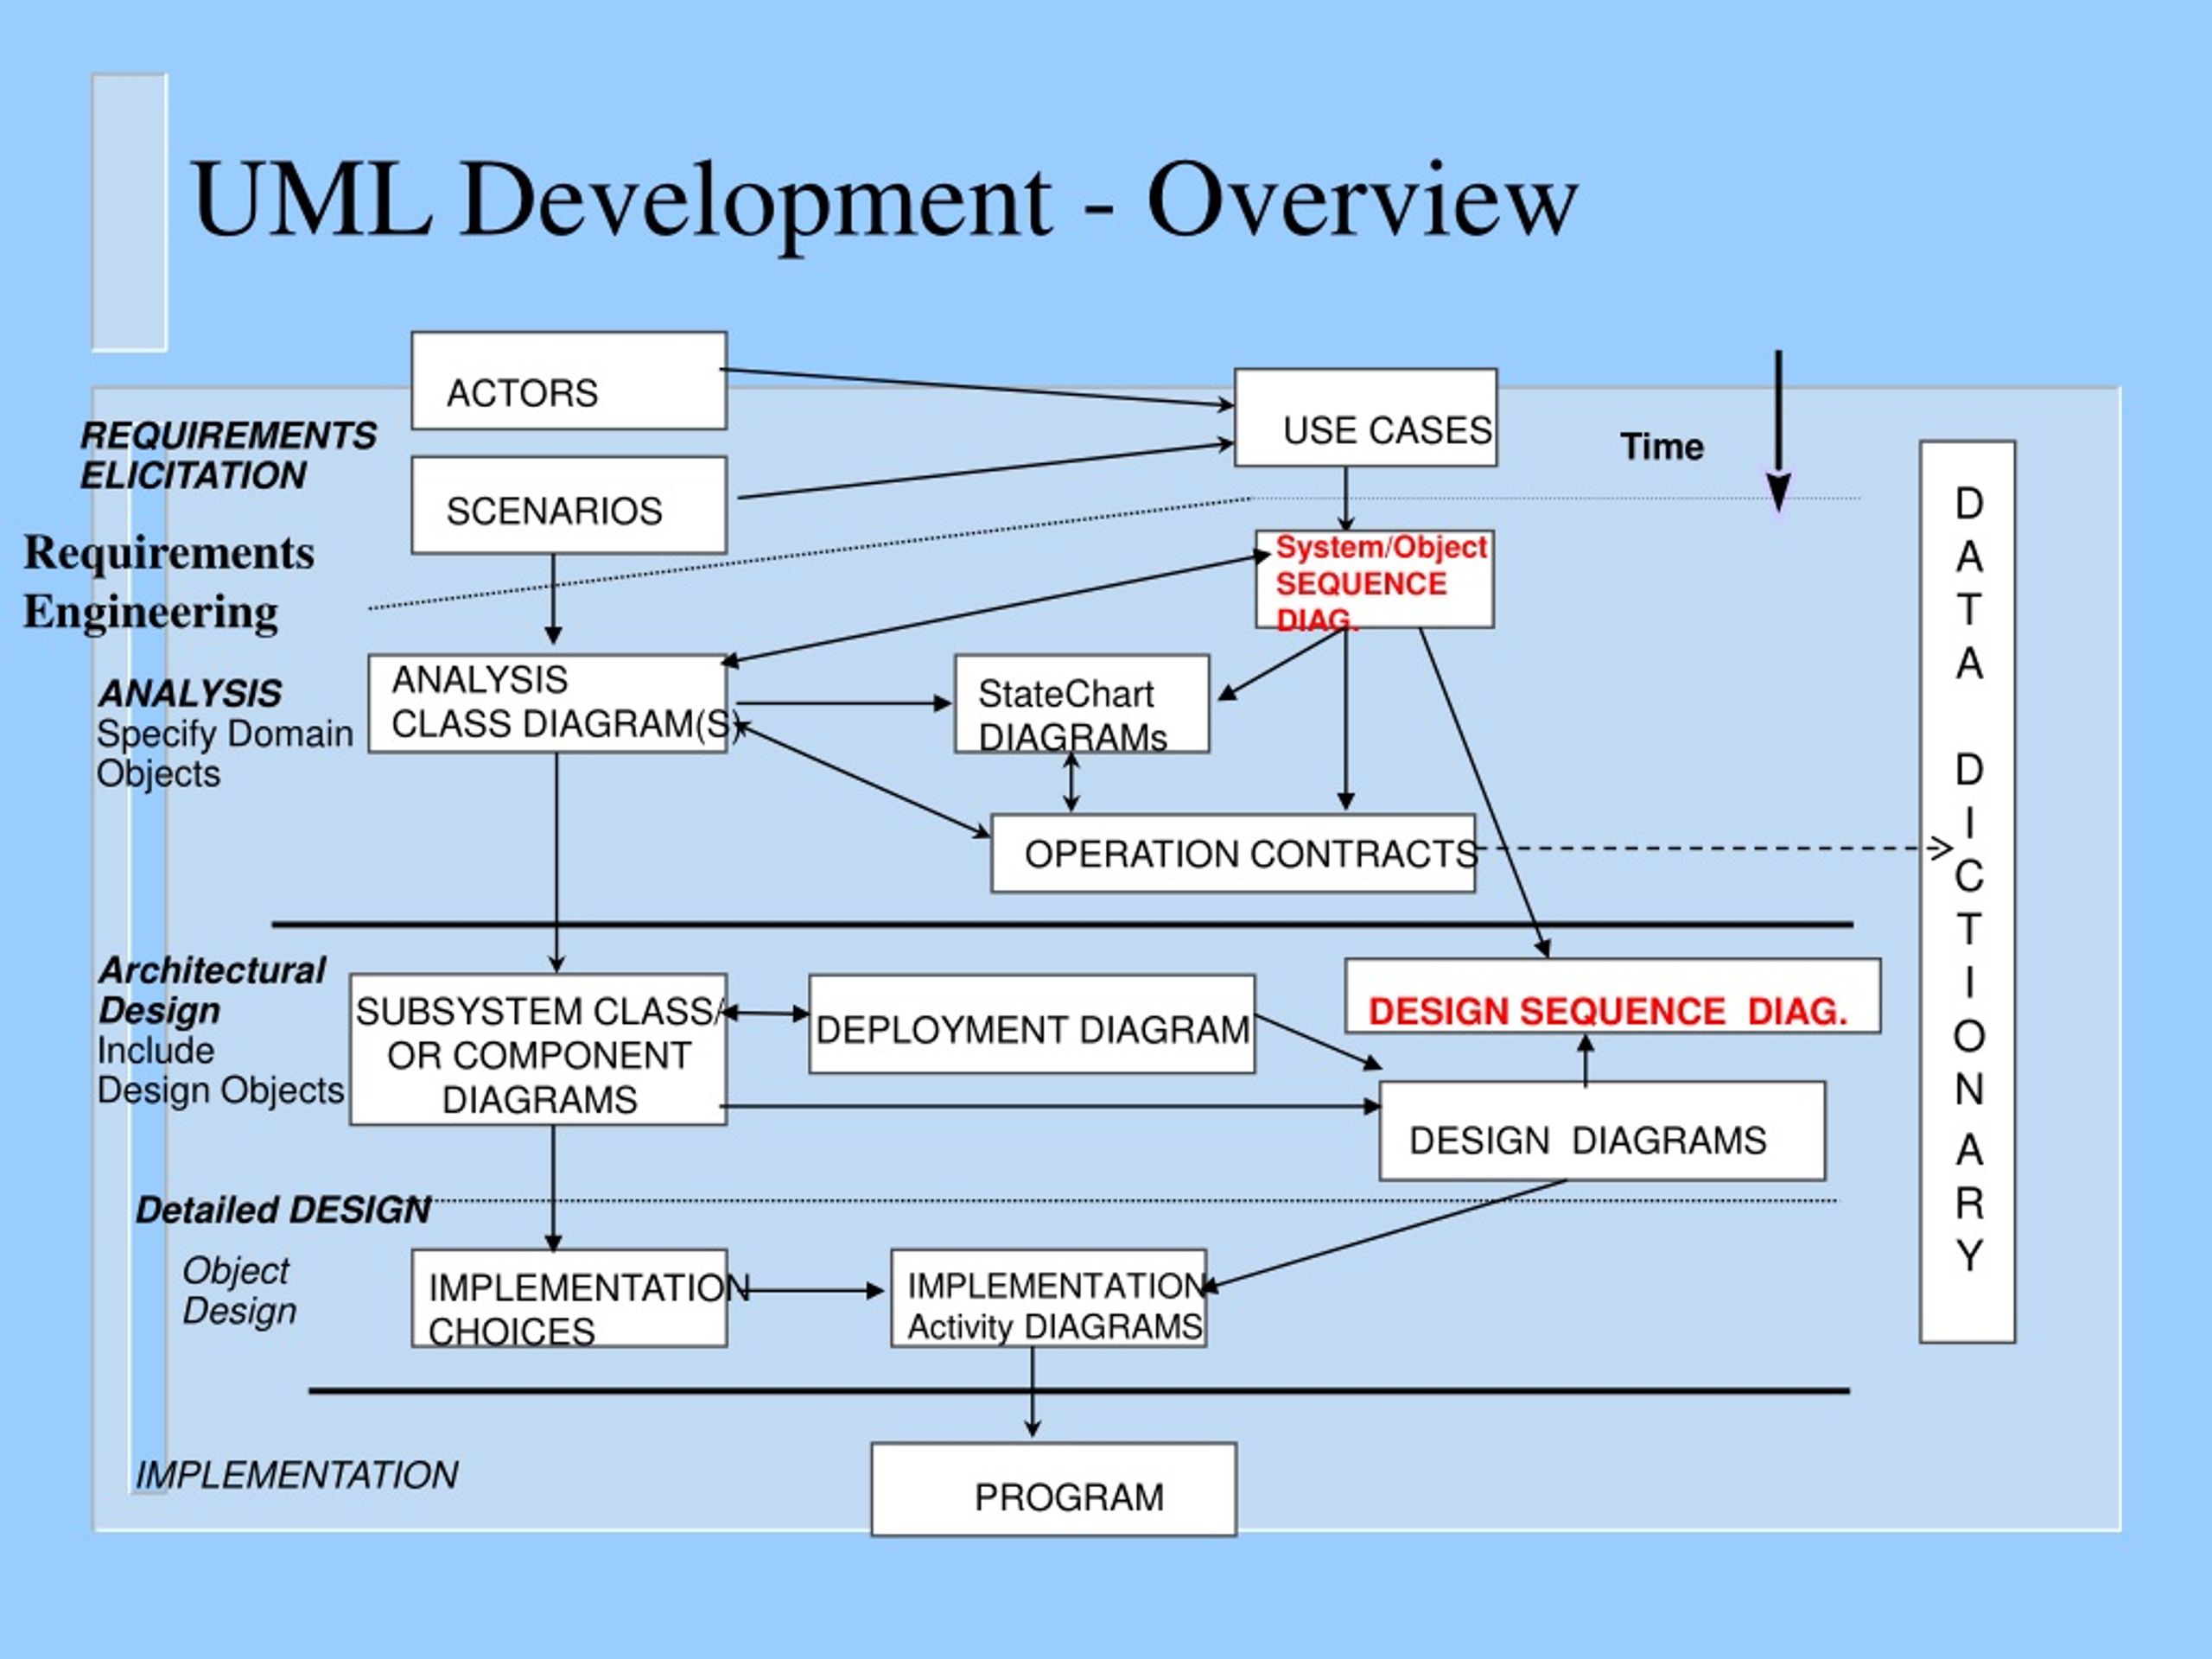 Ppt Uml Diagrams Sequence Diagrams The Requirements Model And The Dynamic Analysis Model 1025